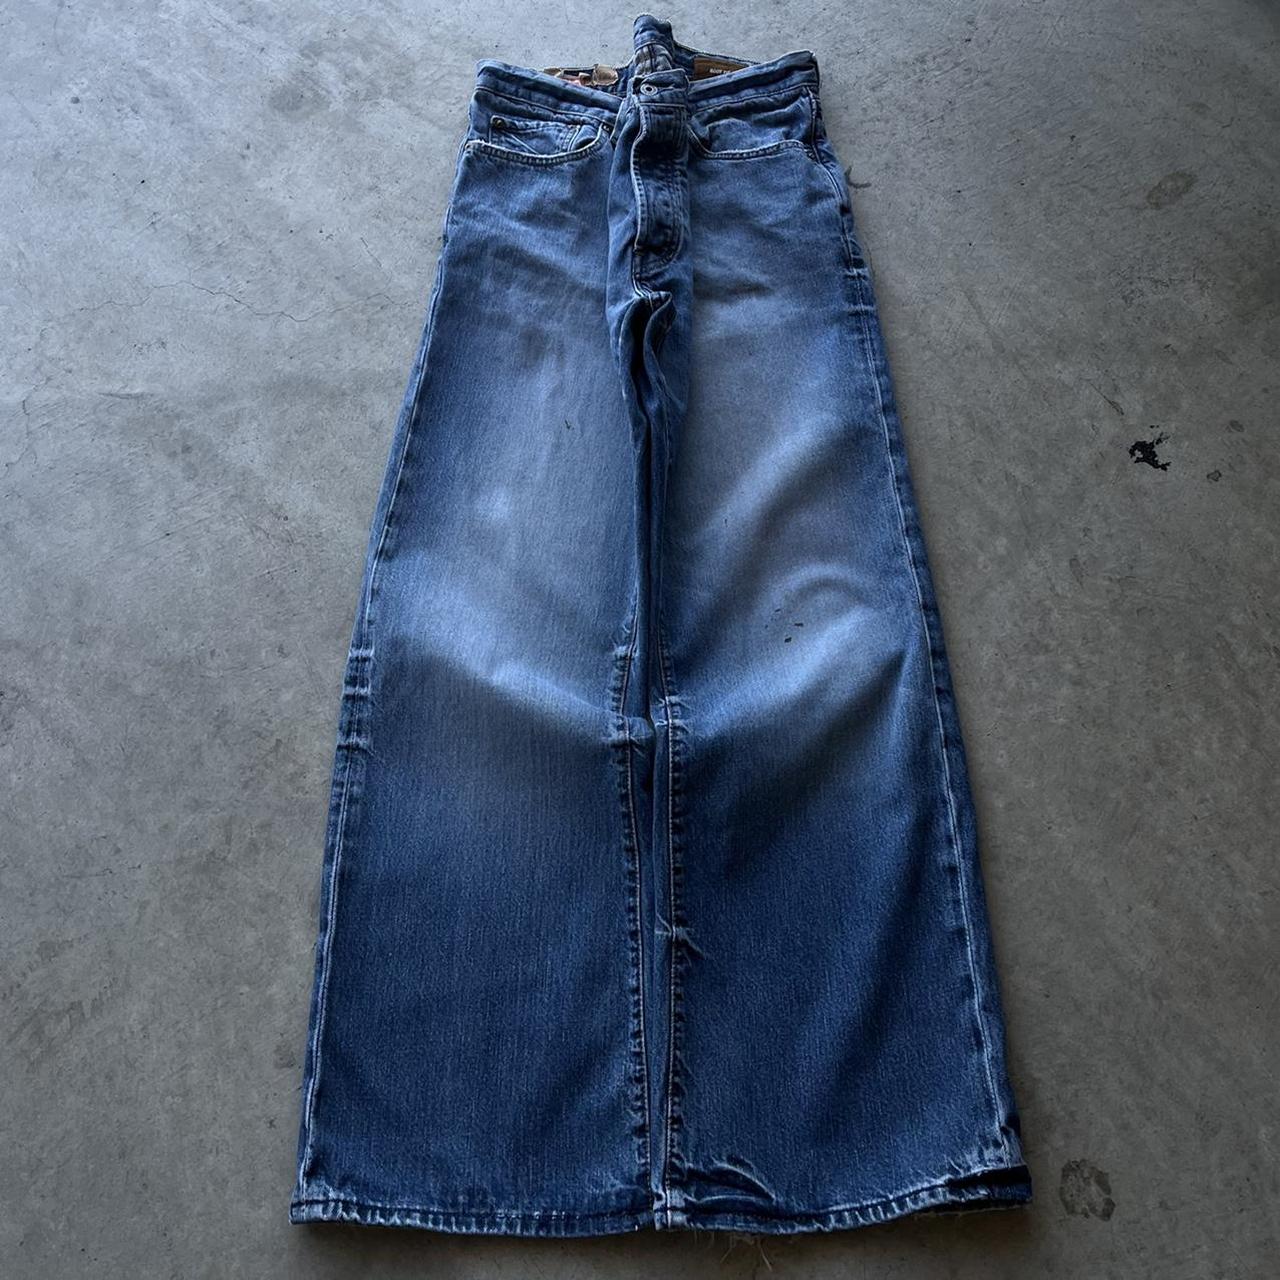 Cyber Y2k Grunge Baggy Jeans Faded jeans from the... - Depop